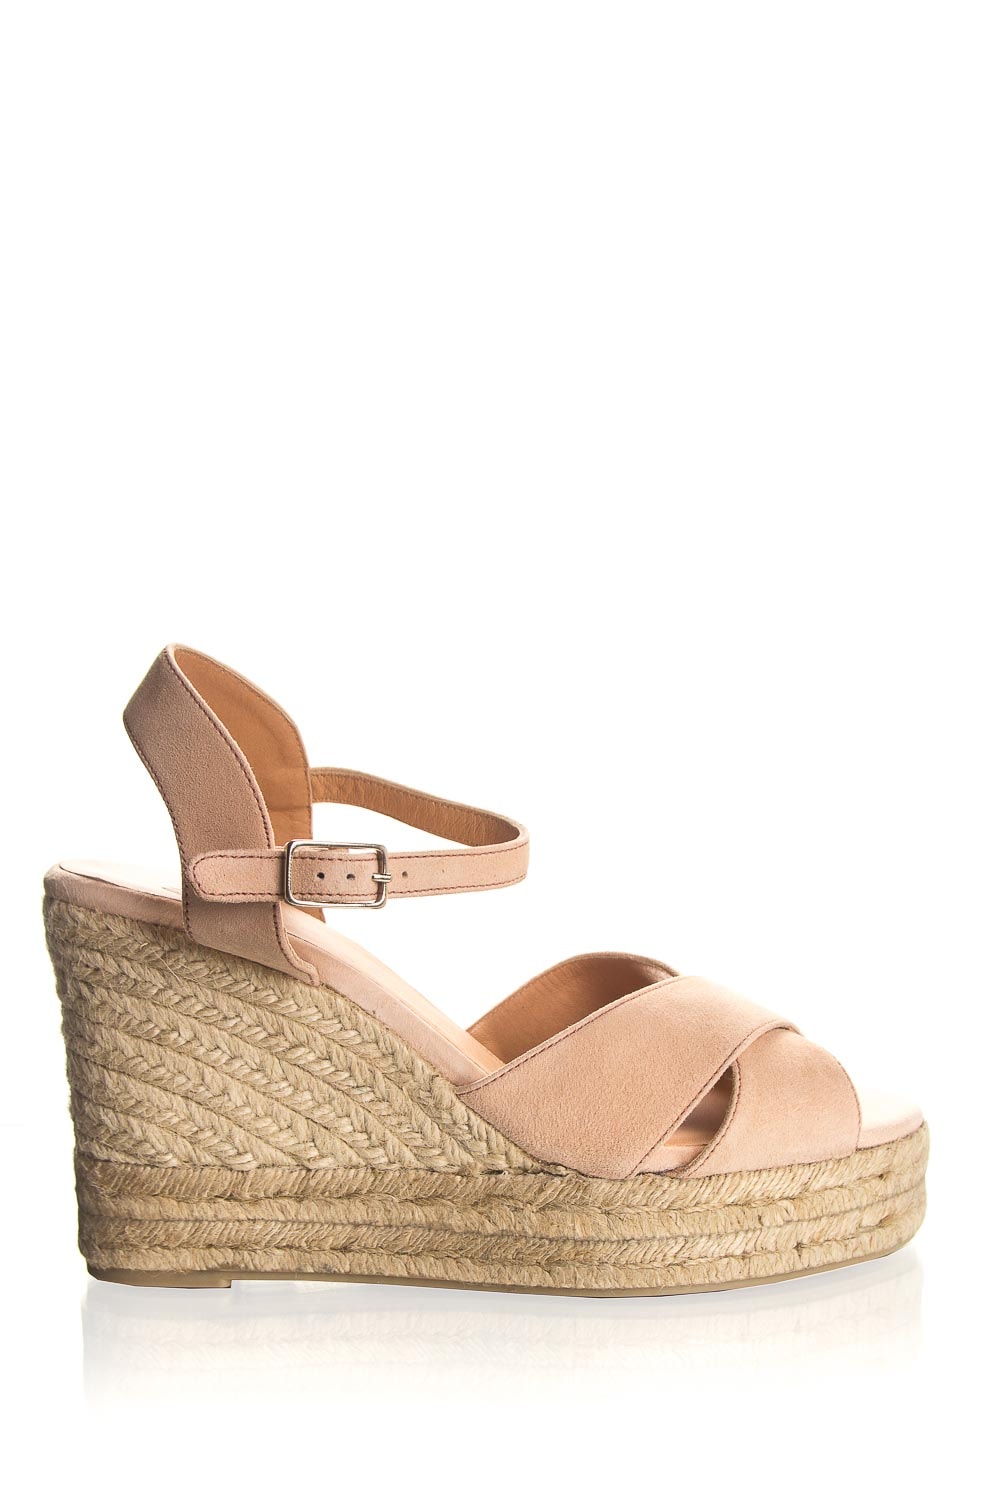 nude coloured wedges